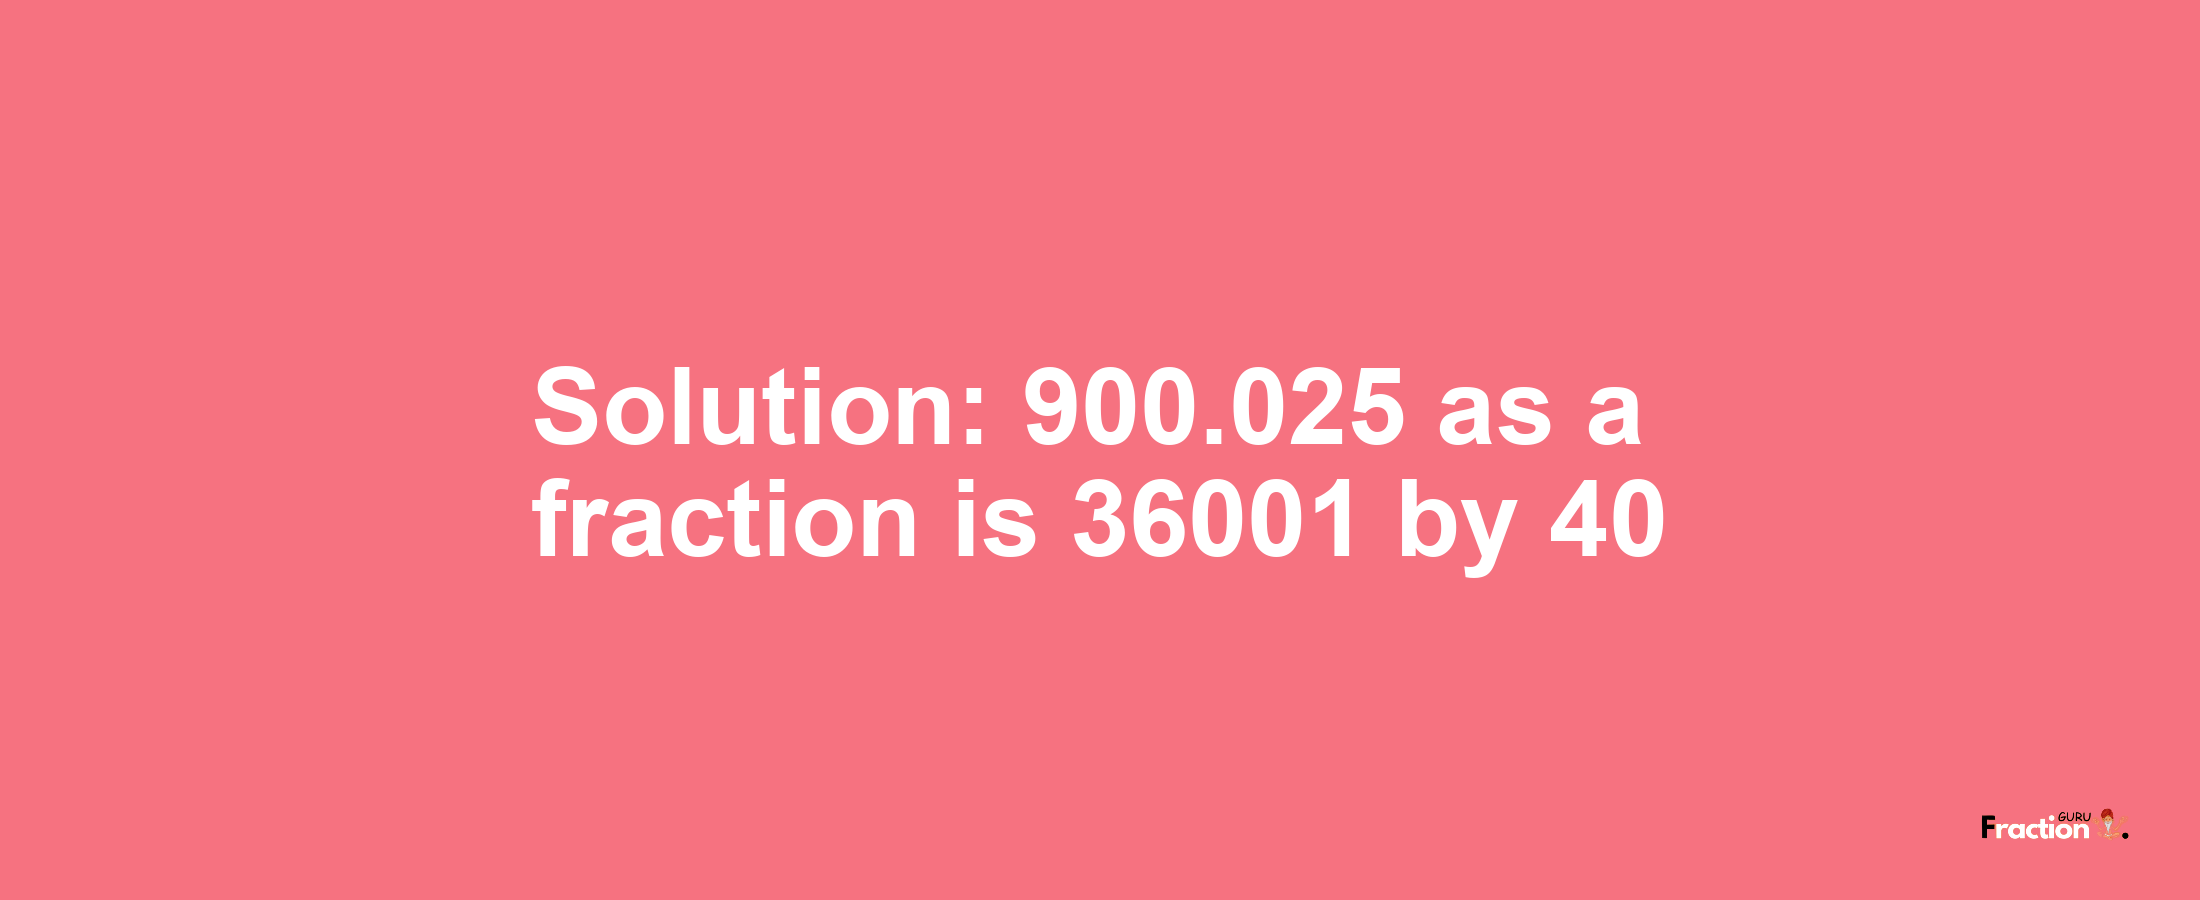 Solution:900.025 as a fraction is 36001/40